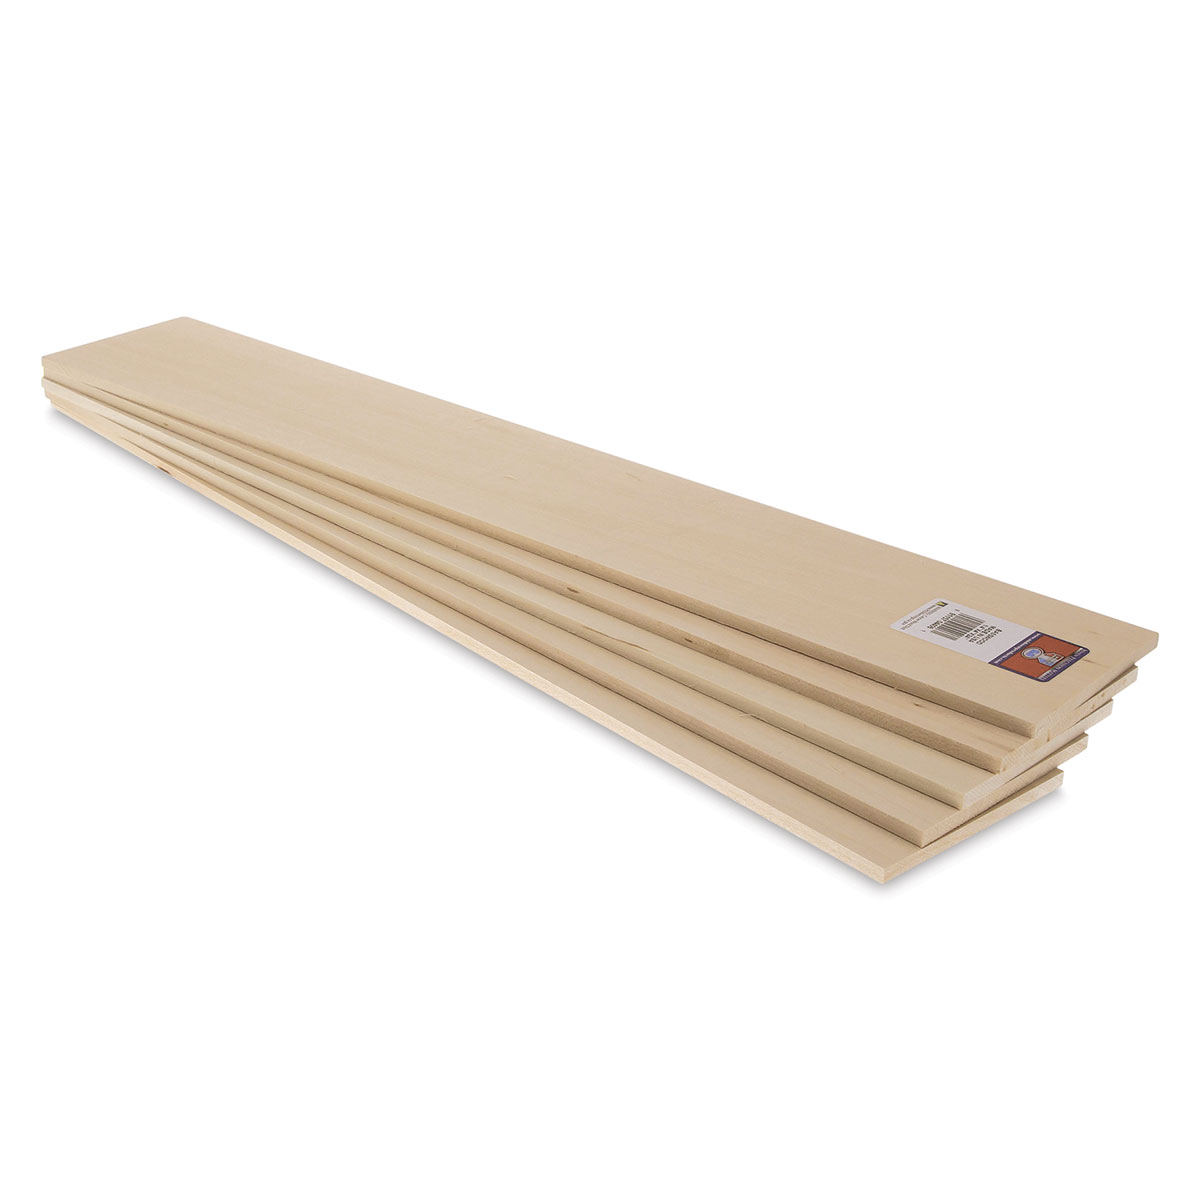 Midwest Products 4402 Basswood Sheet, 24 in L, 4 in W, Basswood 10